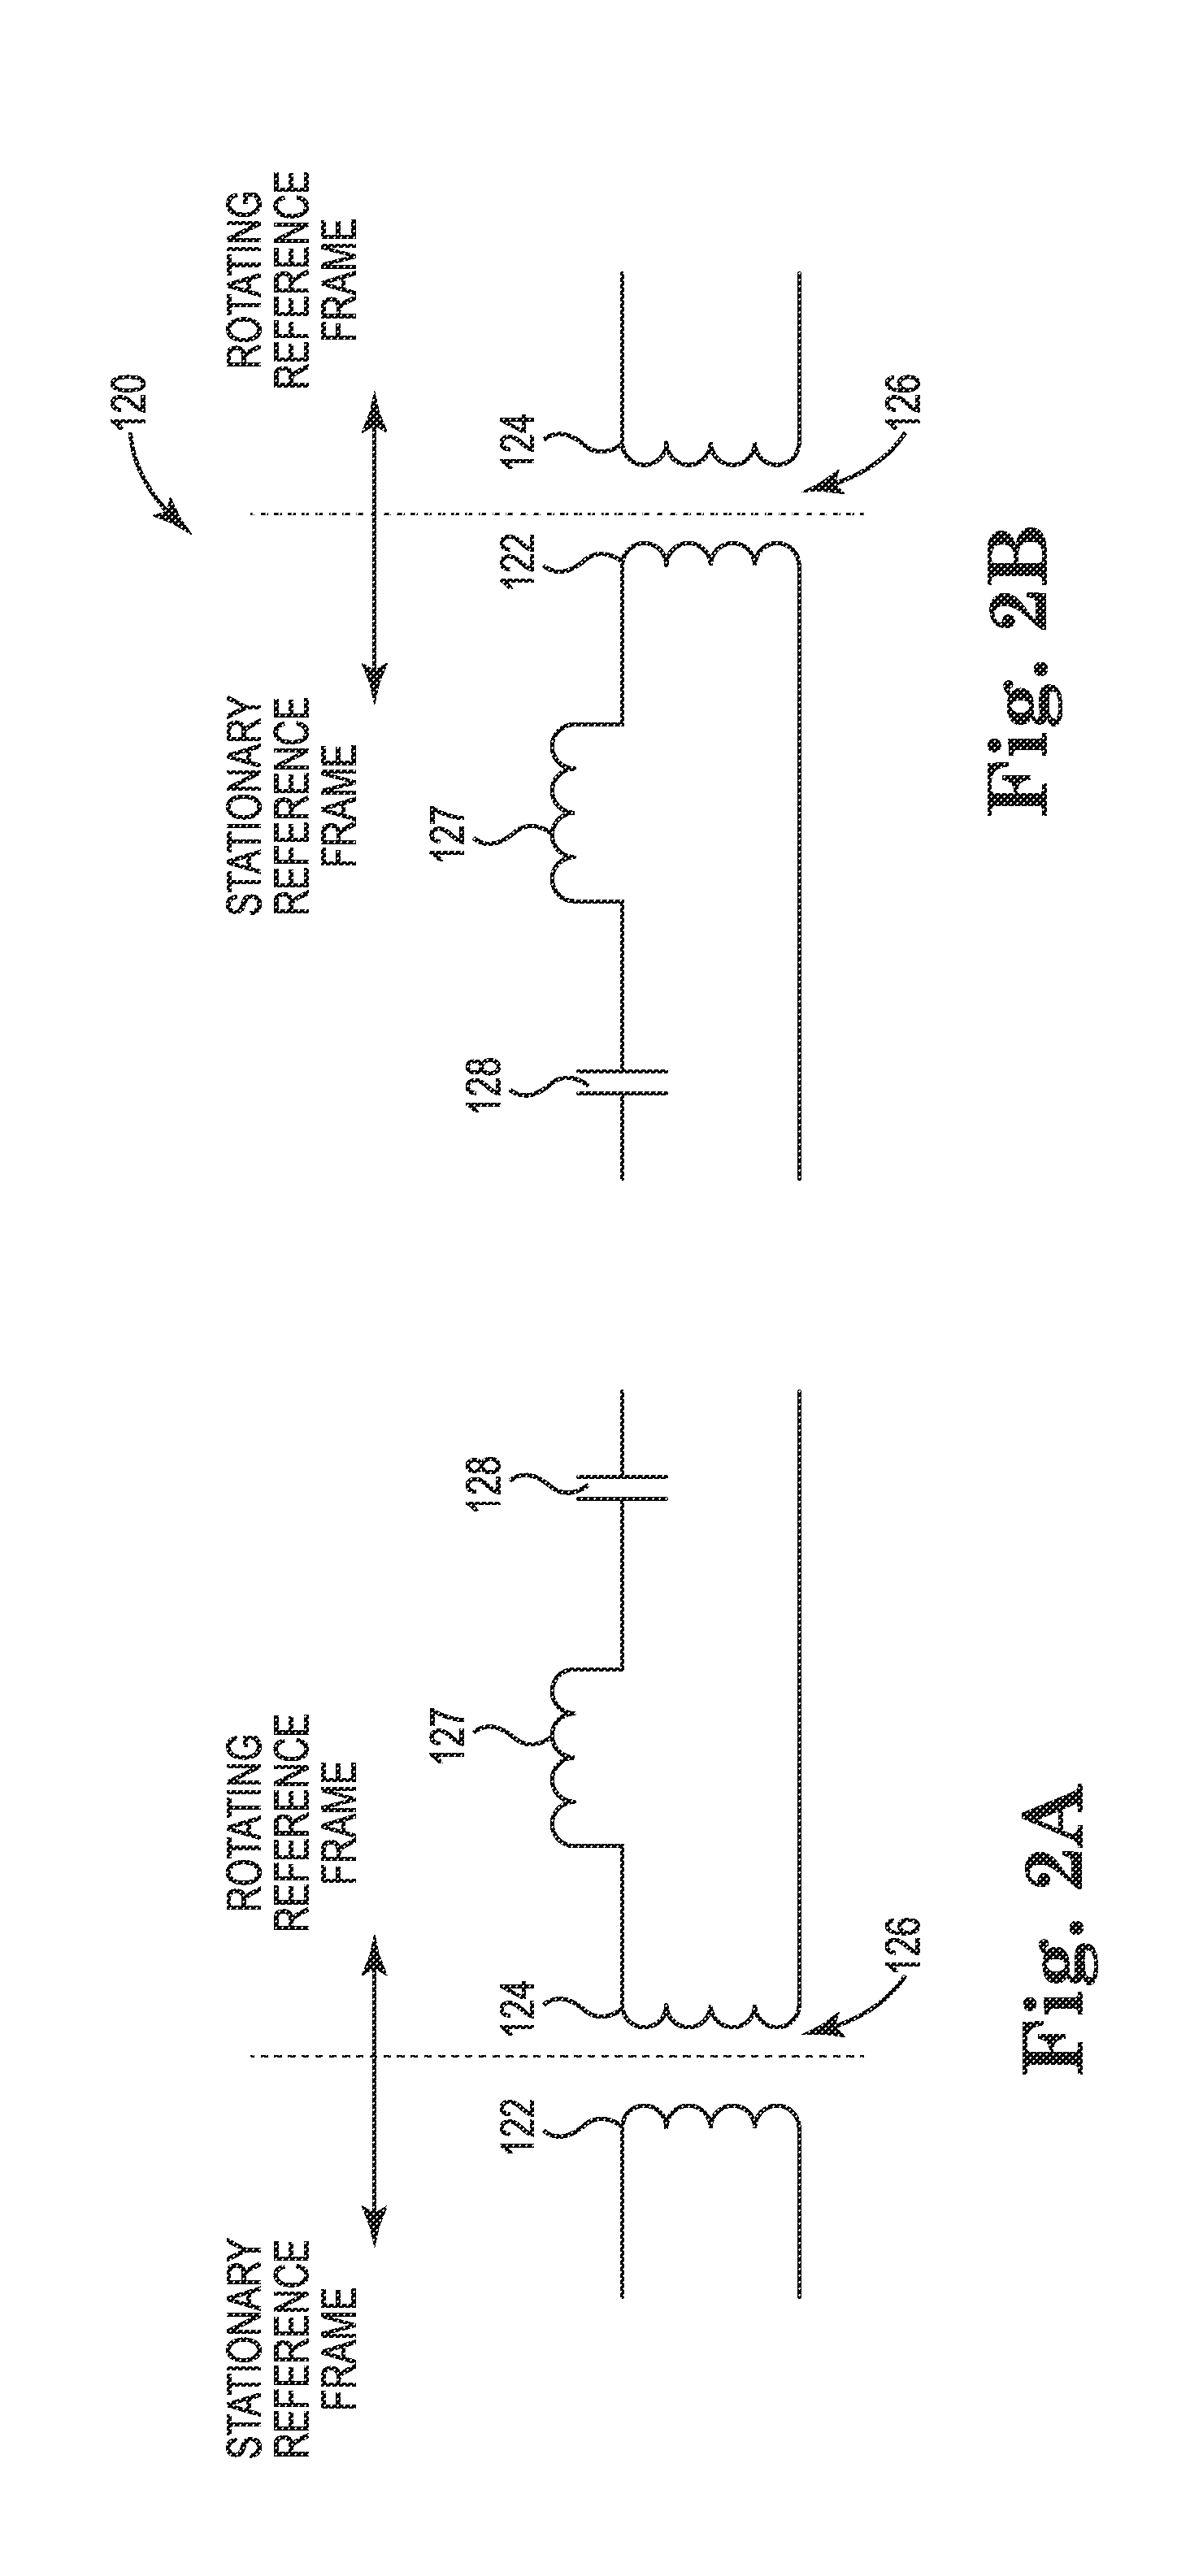 Wound Field Synchronous Machine with Resonant Field Exciter